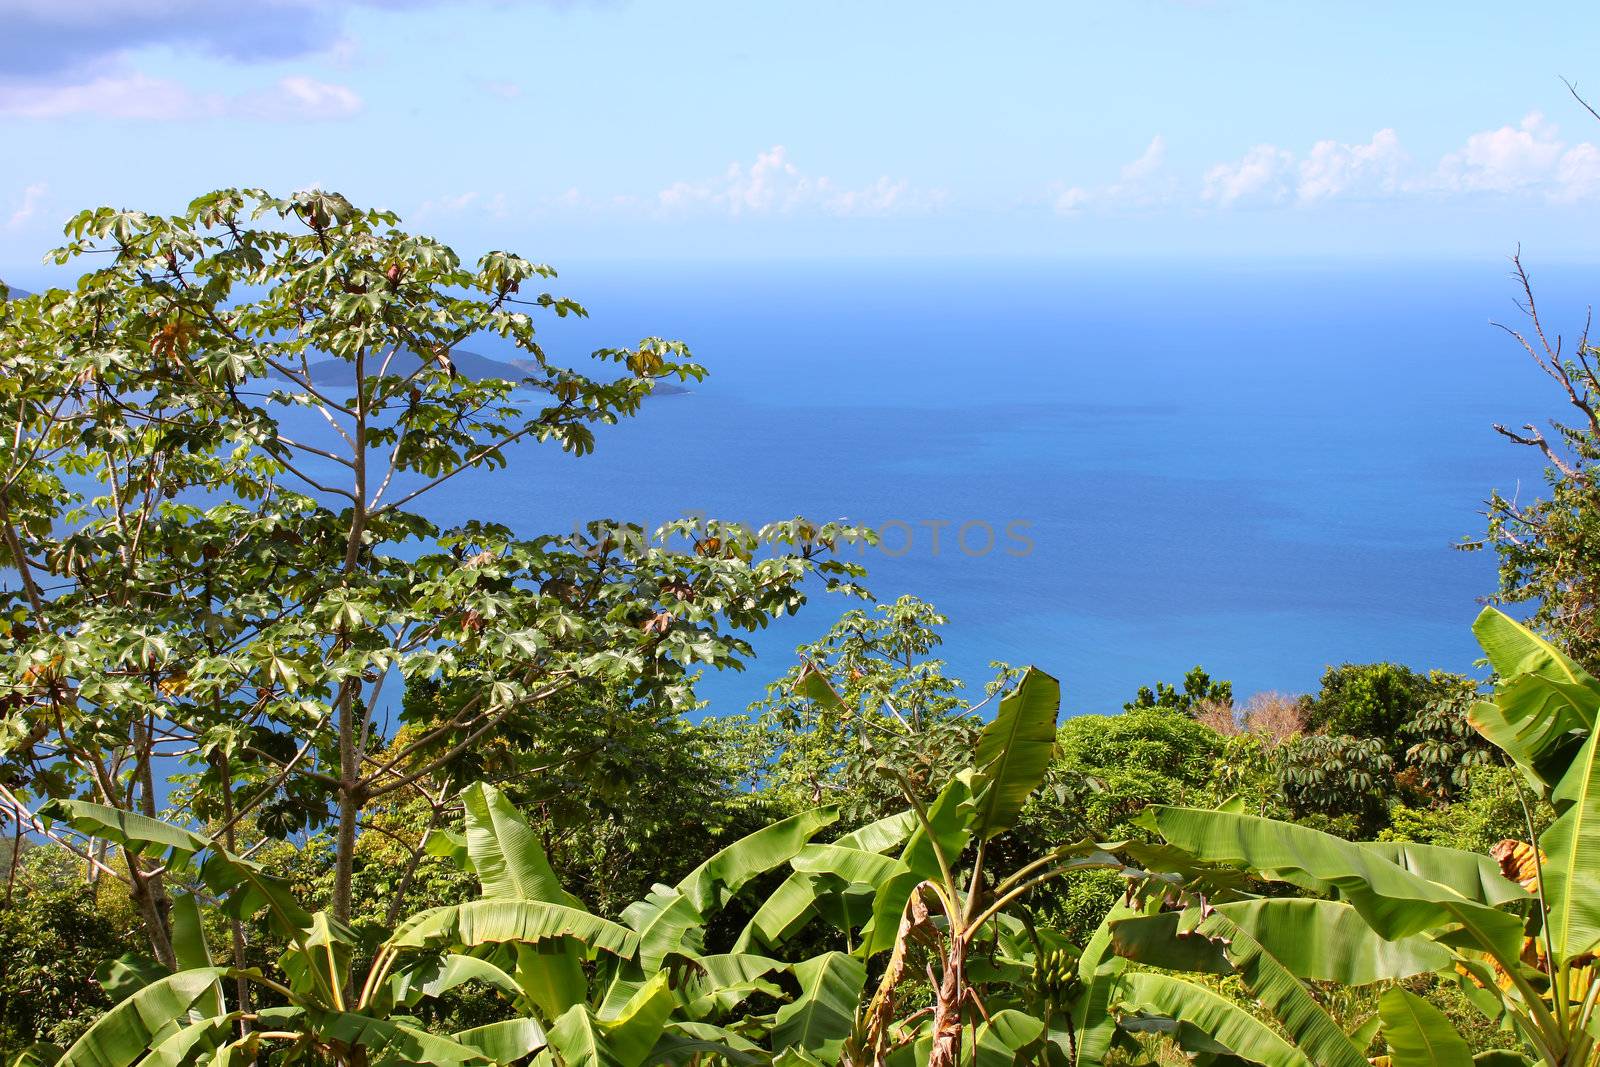 Tropical vegetation and forest scenery on the Caribbean island of Tortola.